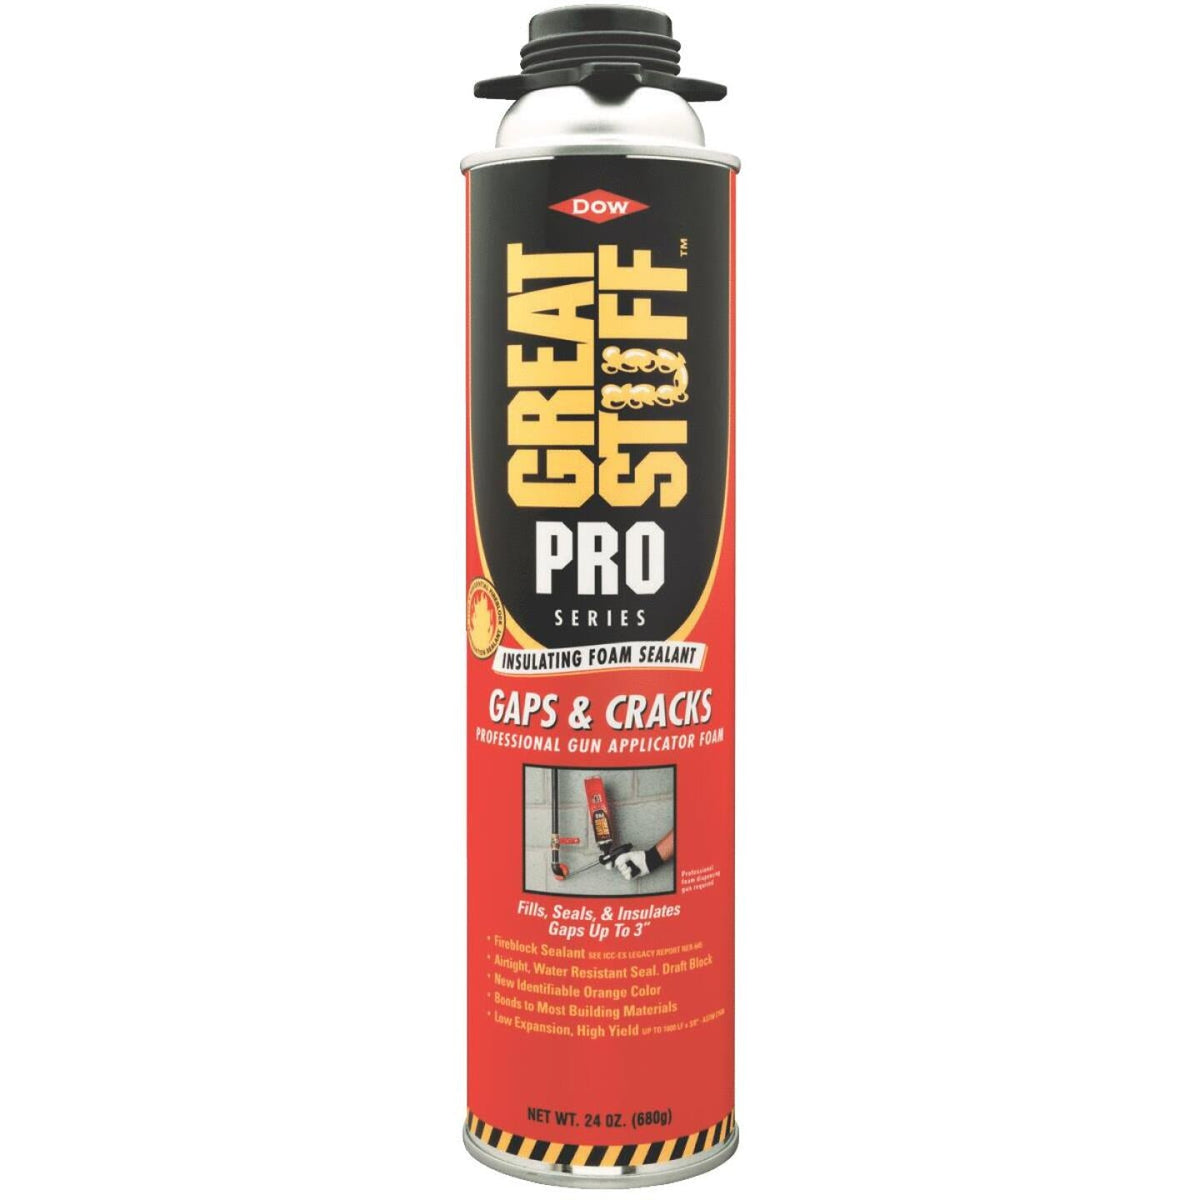 Pro Series Foam Gun - Everkem Diversified Products Specializes In The  Manufacture Of Sealants, Adhesives And Specialty Chemical Compounds Used  For Construction And Industrial Applications